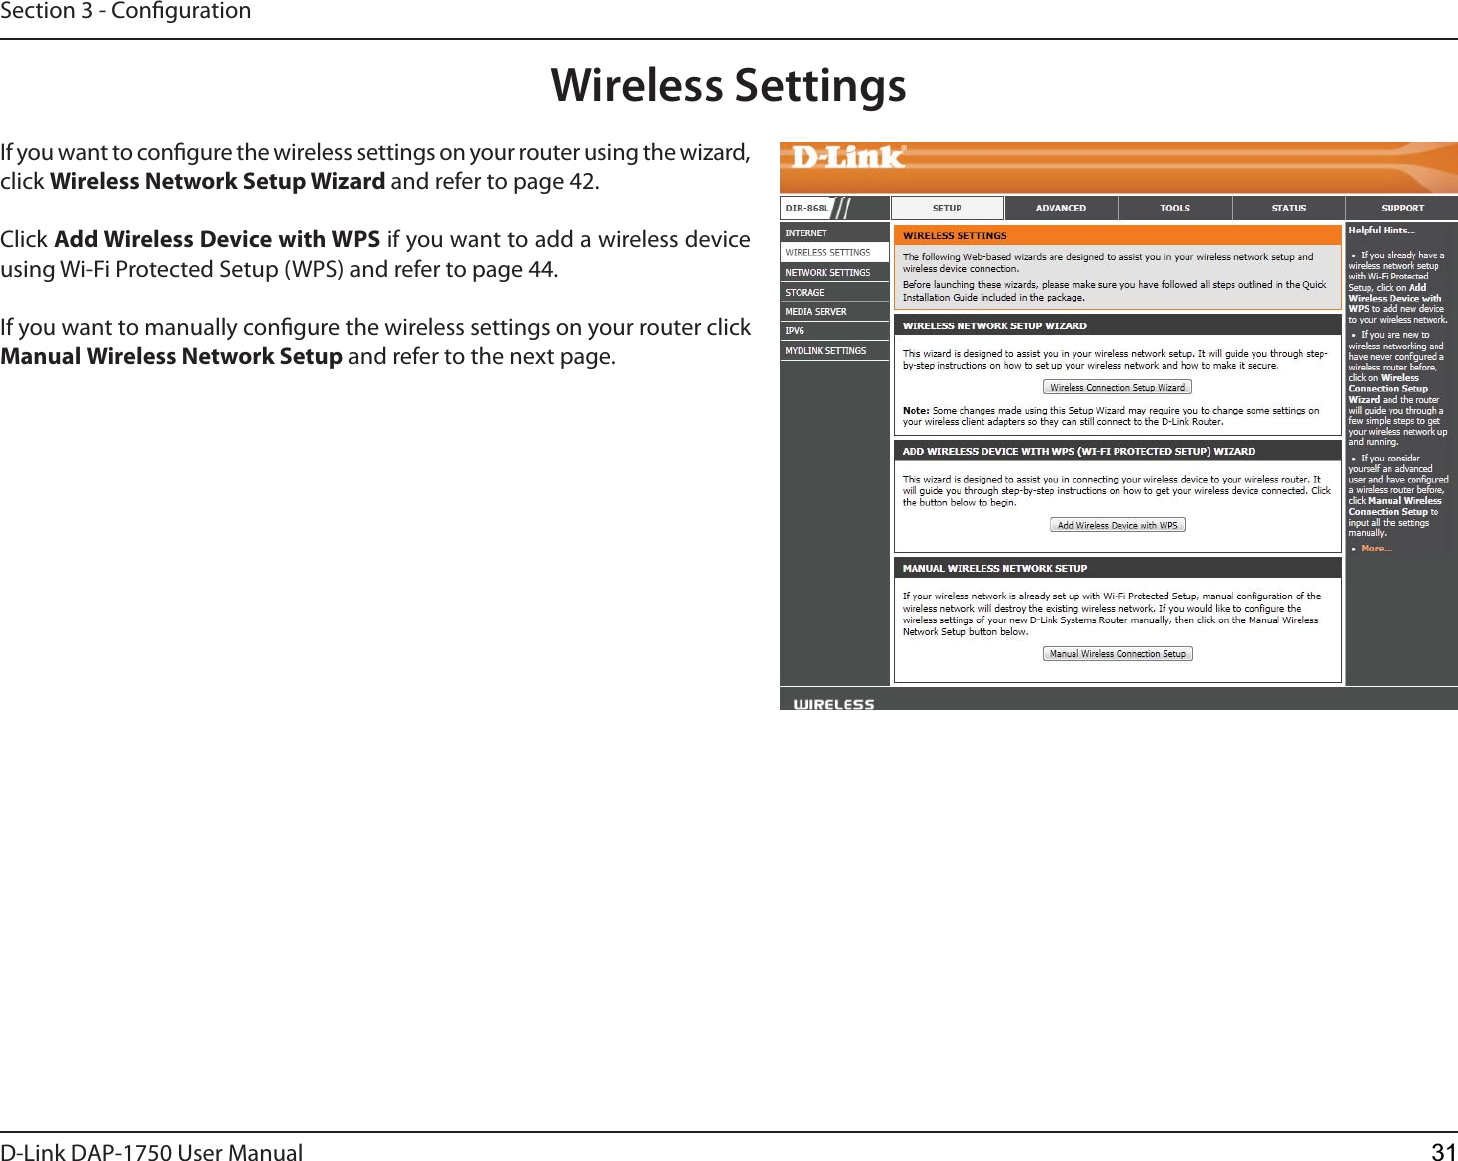 D-Link %&quot;1 User ManualSection 3 - CongurationWireless SettingsIf you want to congure the wireless settings on your router using the wizard, click Wireless Network Setup Wizard and refer to page 42.Click Add Wireless Device with WPS if you want to add a wireless device using Wi-Fi Protected Setup (WPS) and refer to page 44.If you want to manually congure the wireless settings on your router click Manual Wireless Network Setup and refer to the next page.31